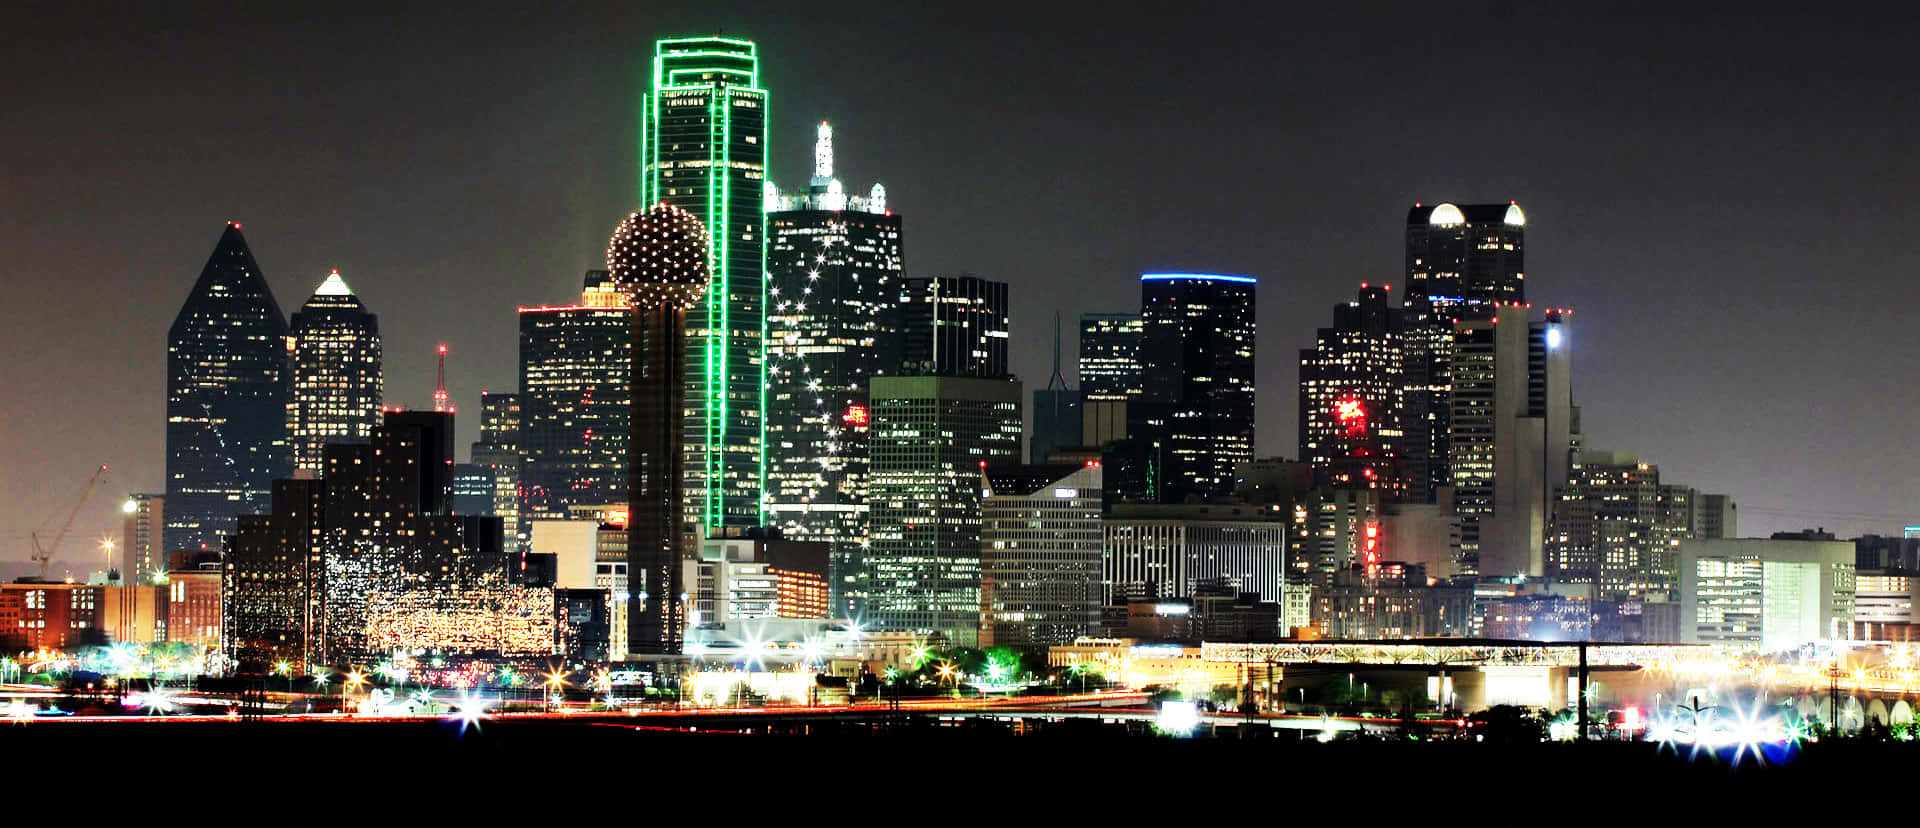 Aerial View Of The Beautiful City Of Dallas, Texas